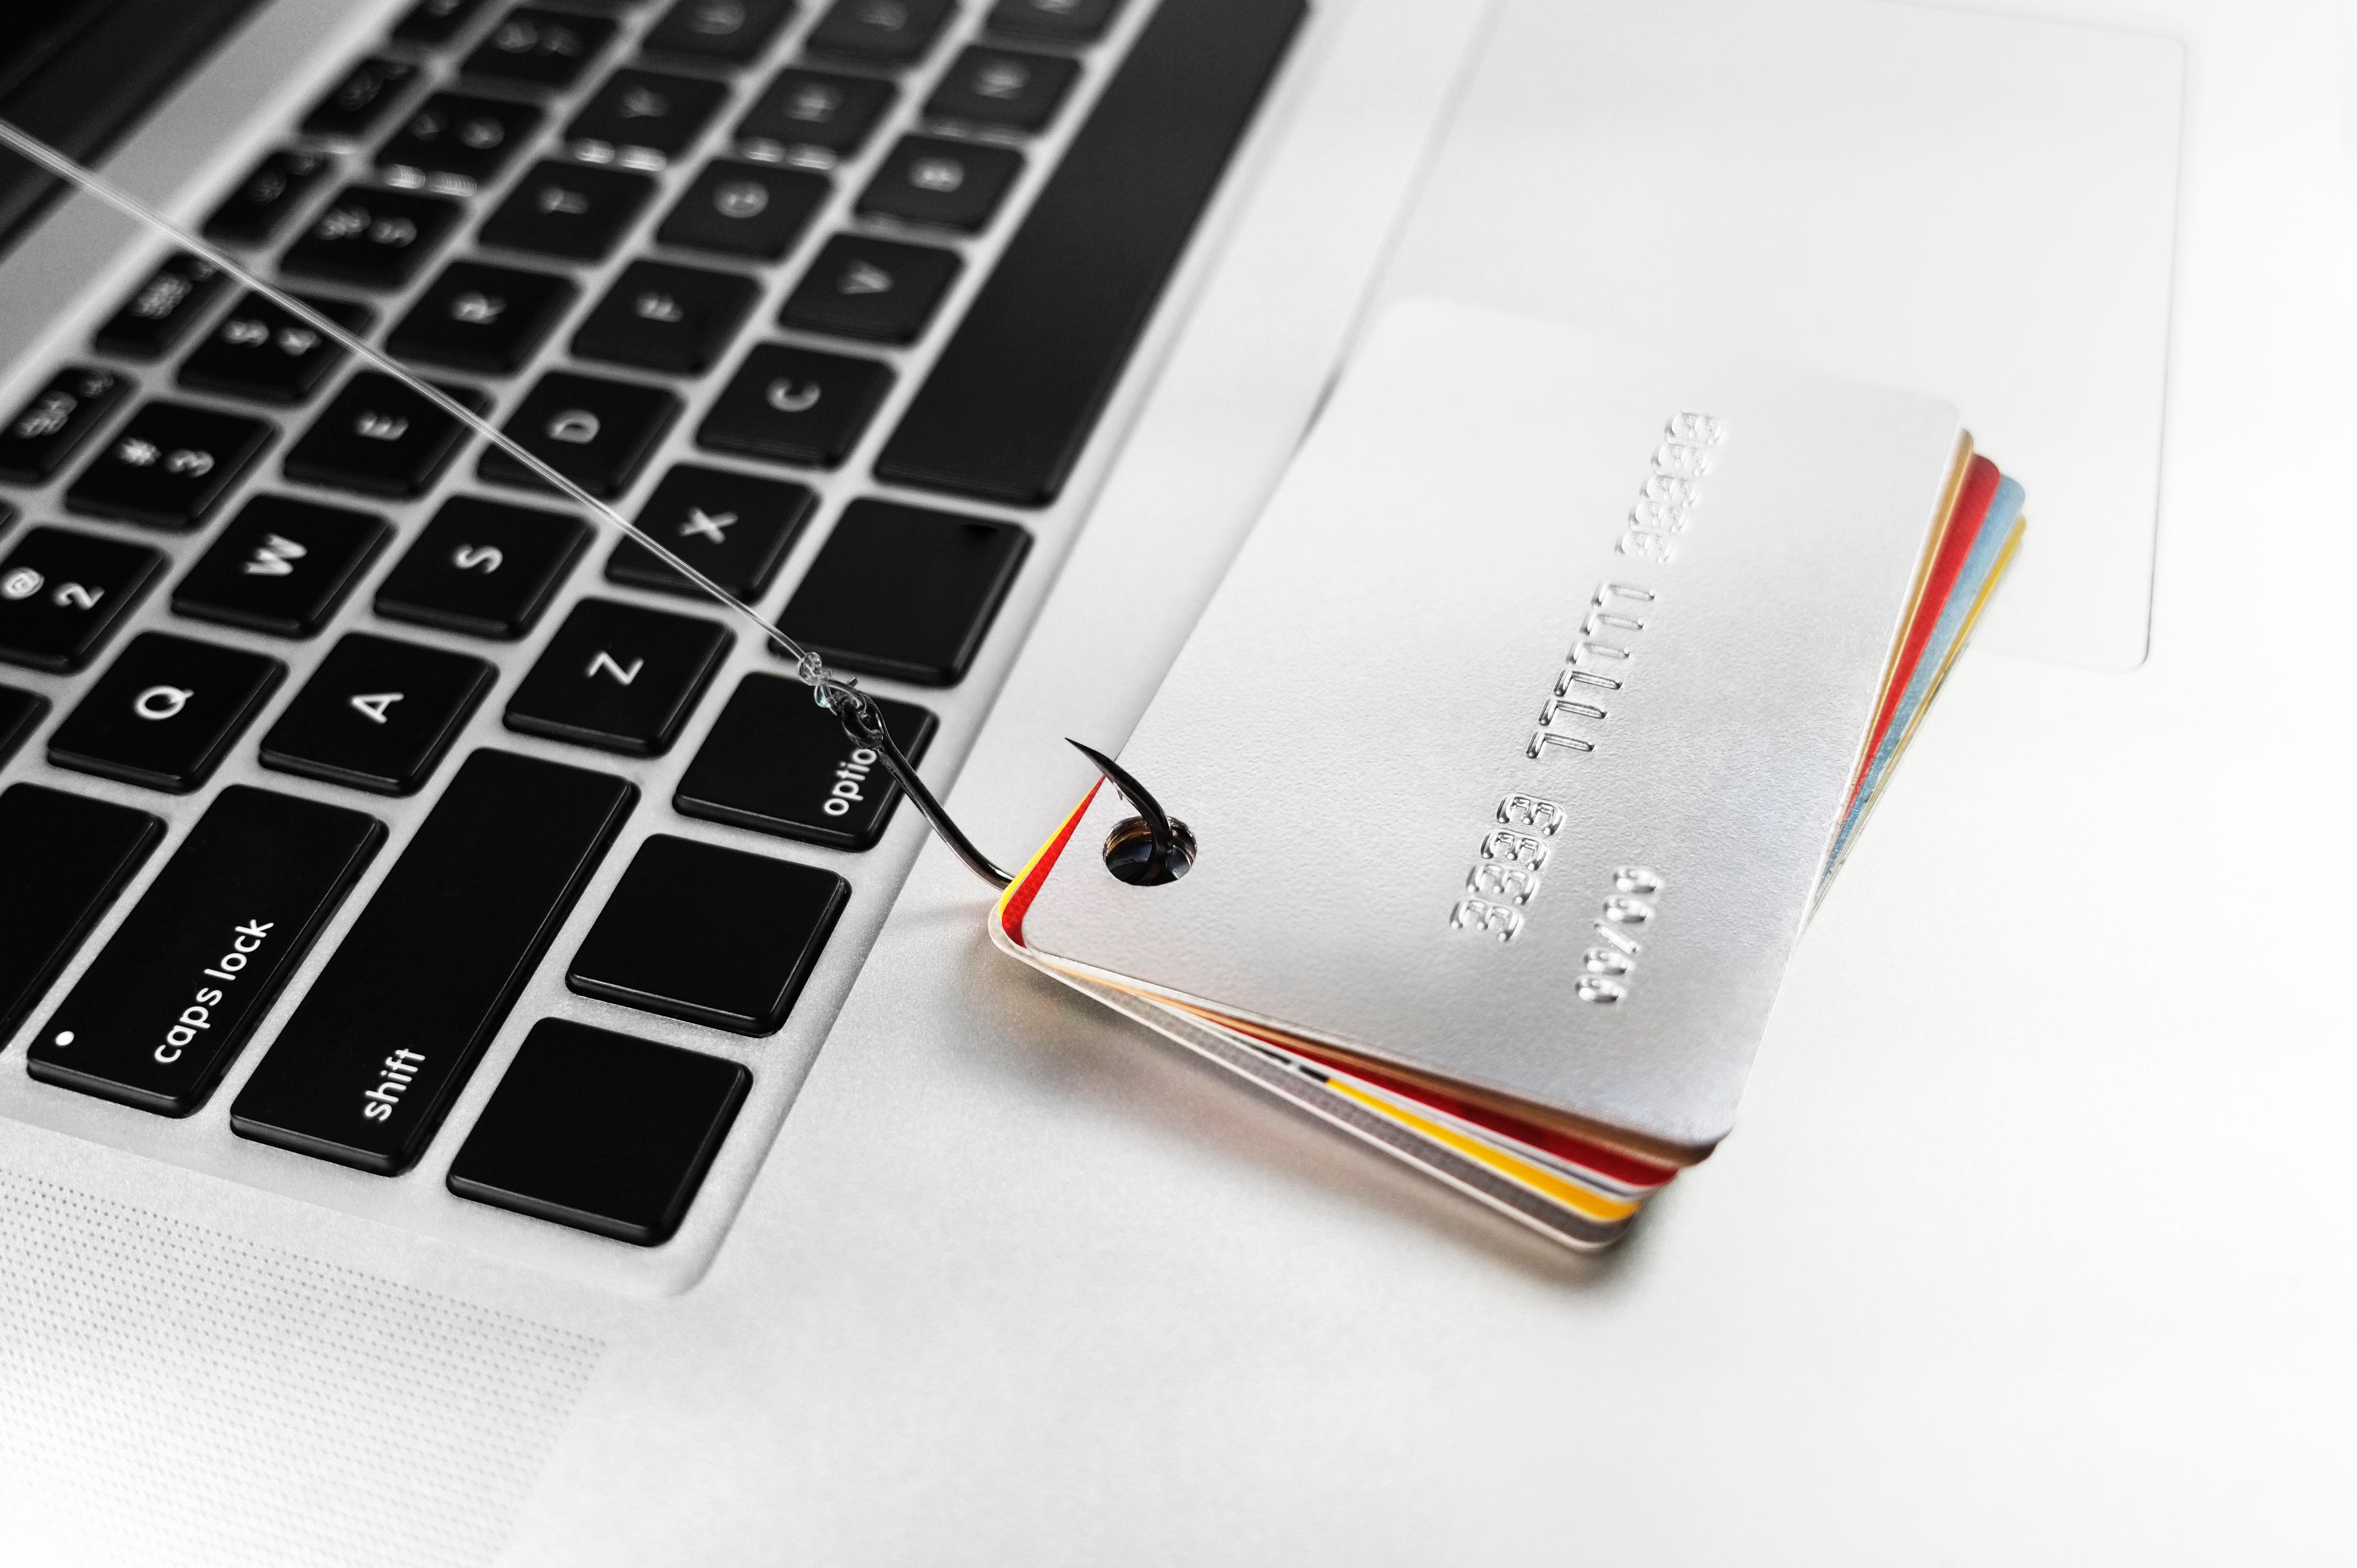 Credit card fraud affected 42 per cent of respondents in a recent poll of countries in the Asia-Pacific. Photo: Alamy